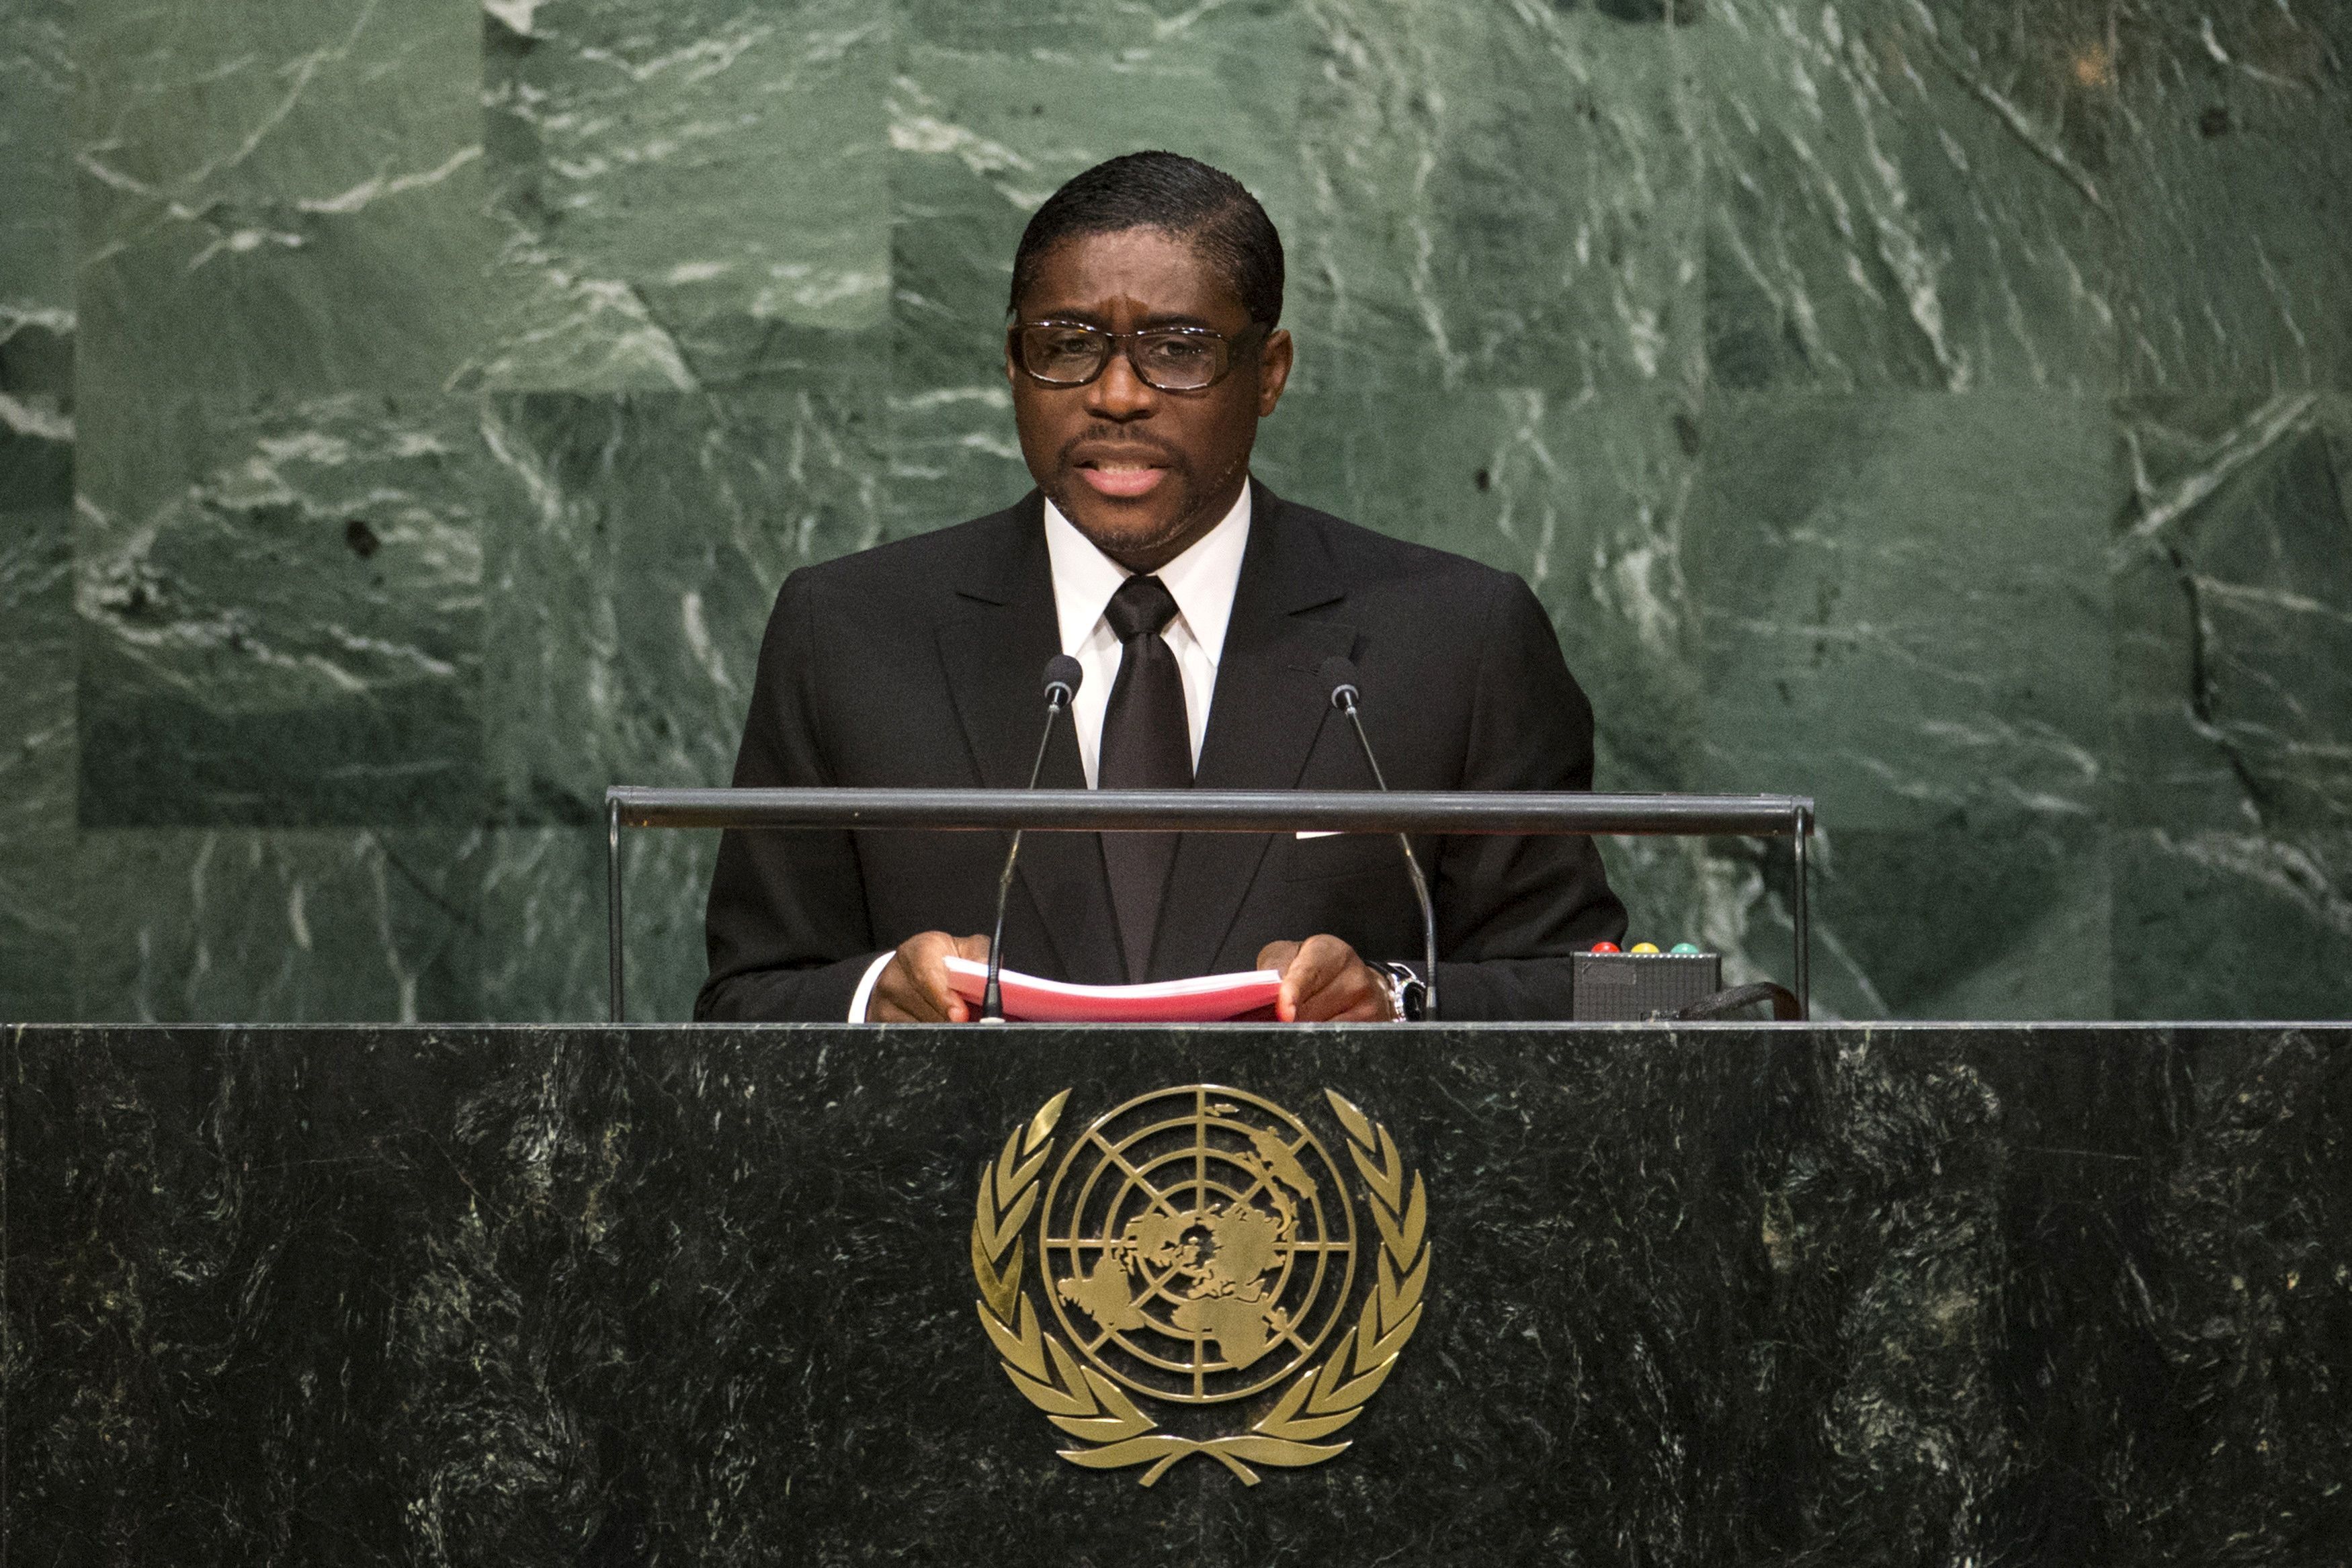 Equatorial Guinea's Second Vice-President Obiang Mangue addresses attendees during the 70th session of the United Nations General Assembly at the U.N. Headquarters in New York